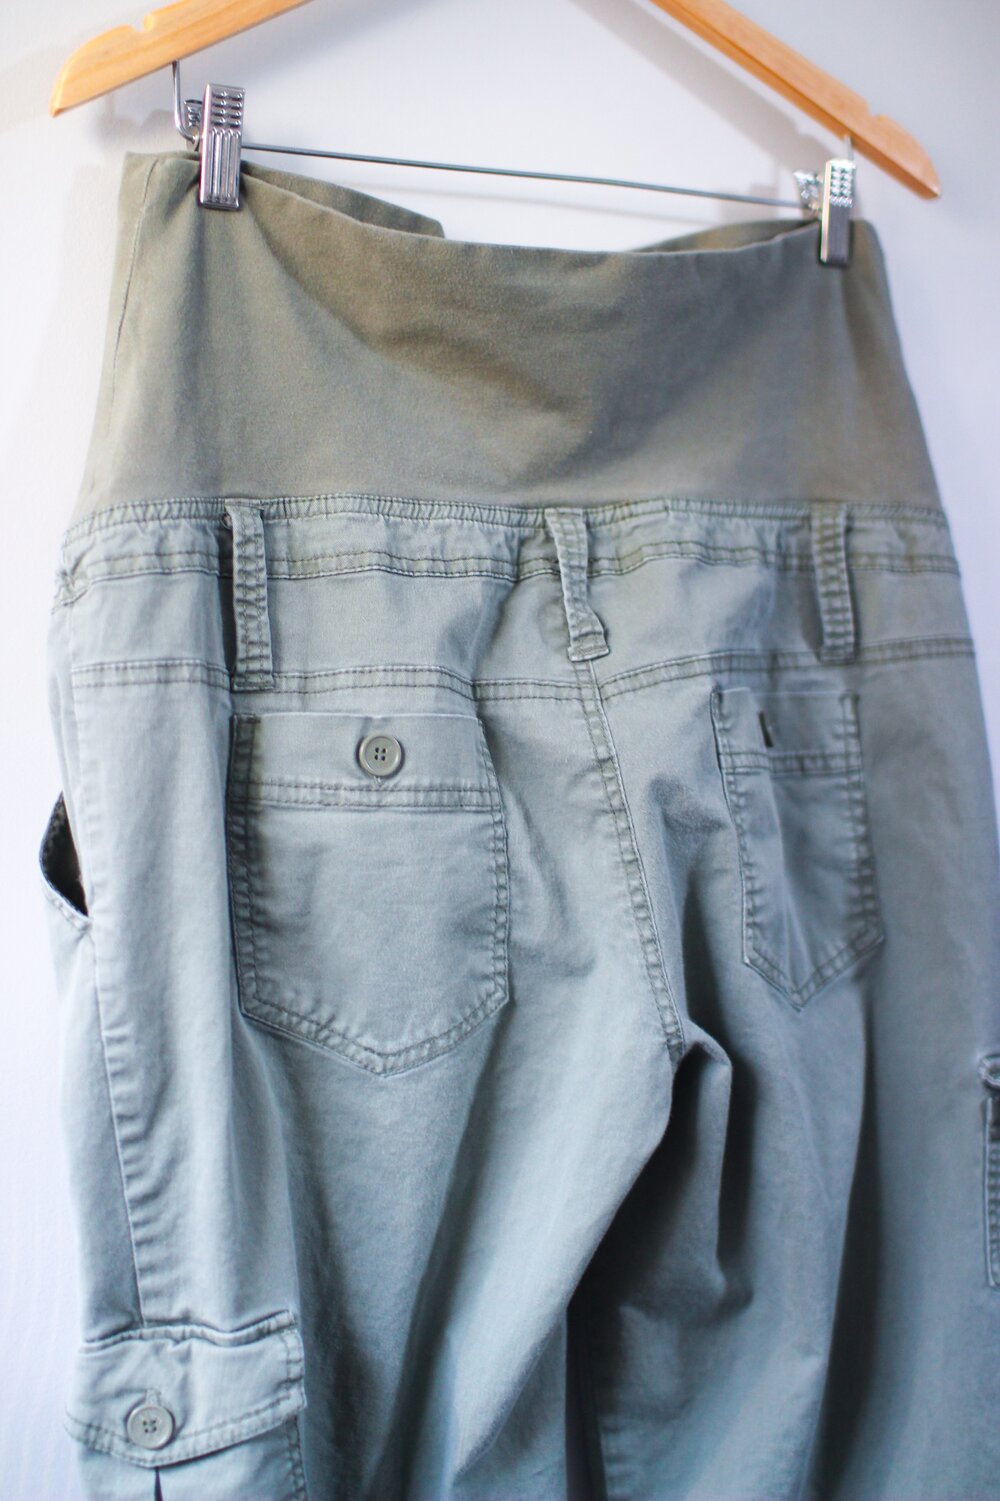 Motherhood Maternity cargo shorts in size Small — Struck by Secondhand